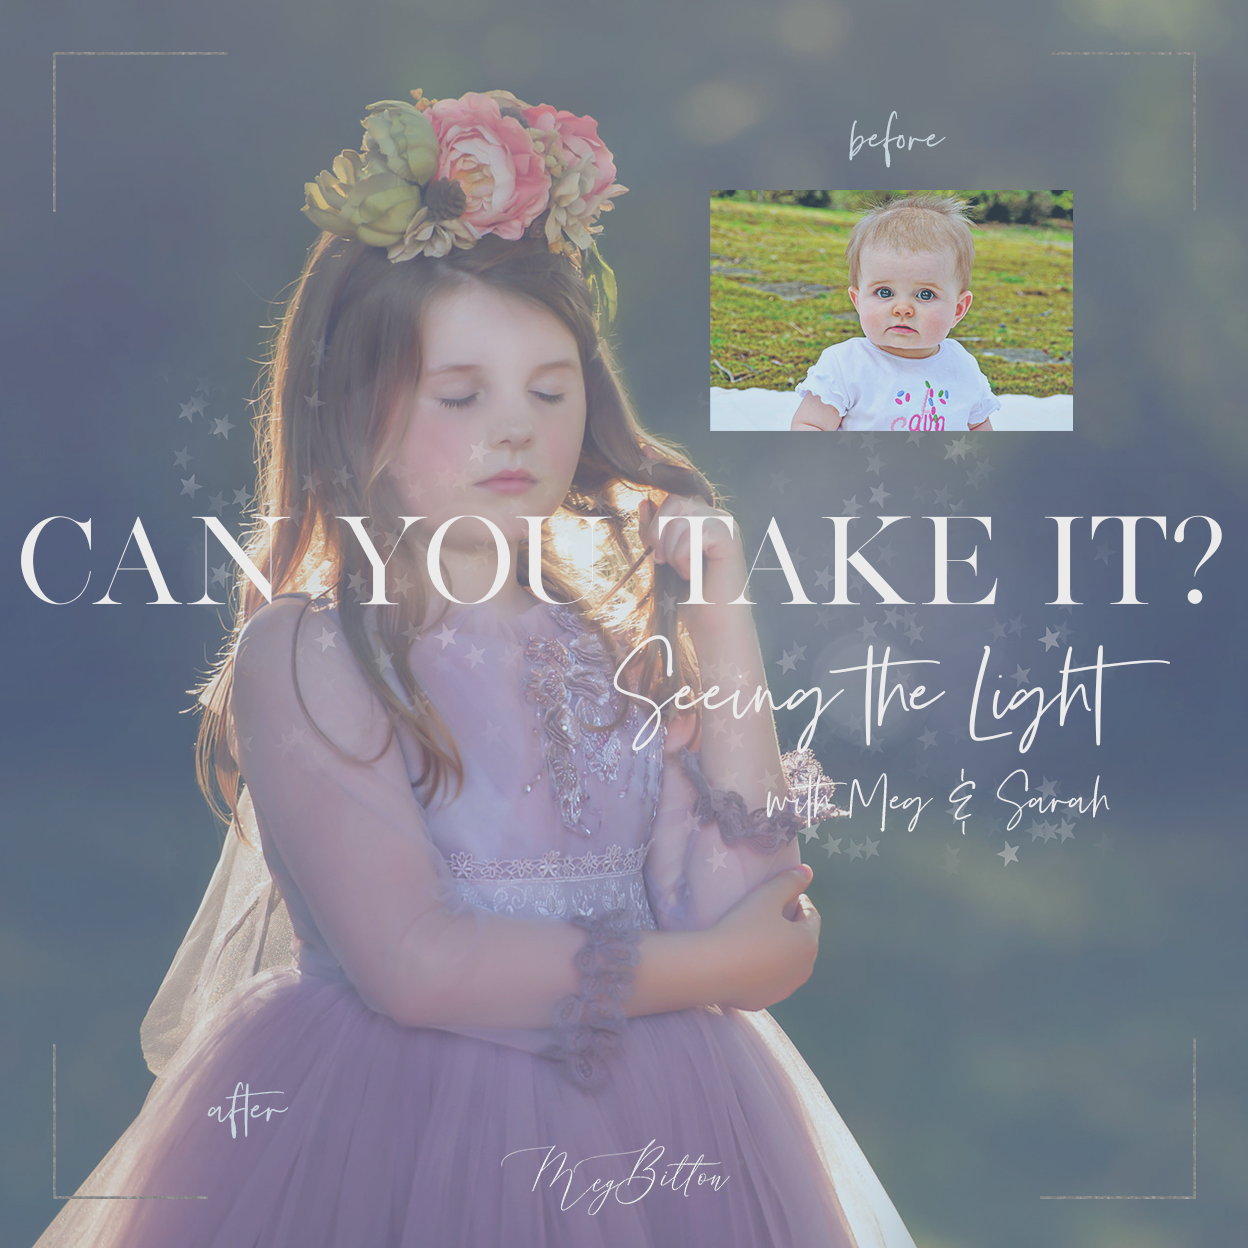 Can You Take It - Seeing the Light - May 25 2020 - Meg Bitton Productions